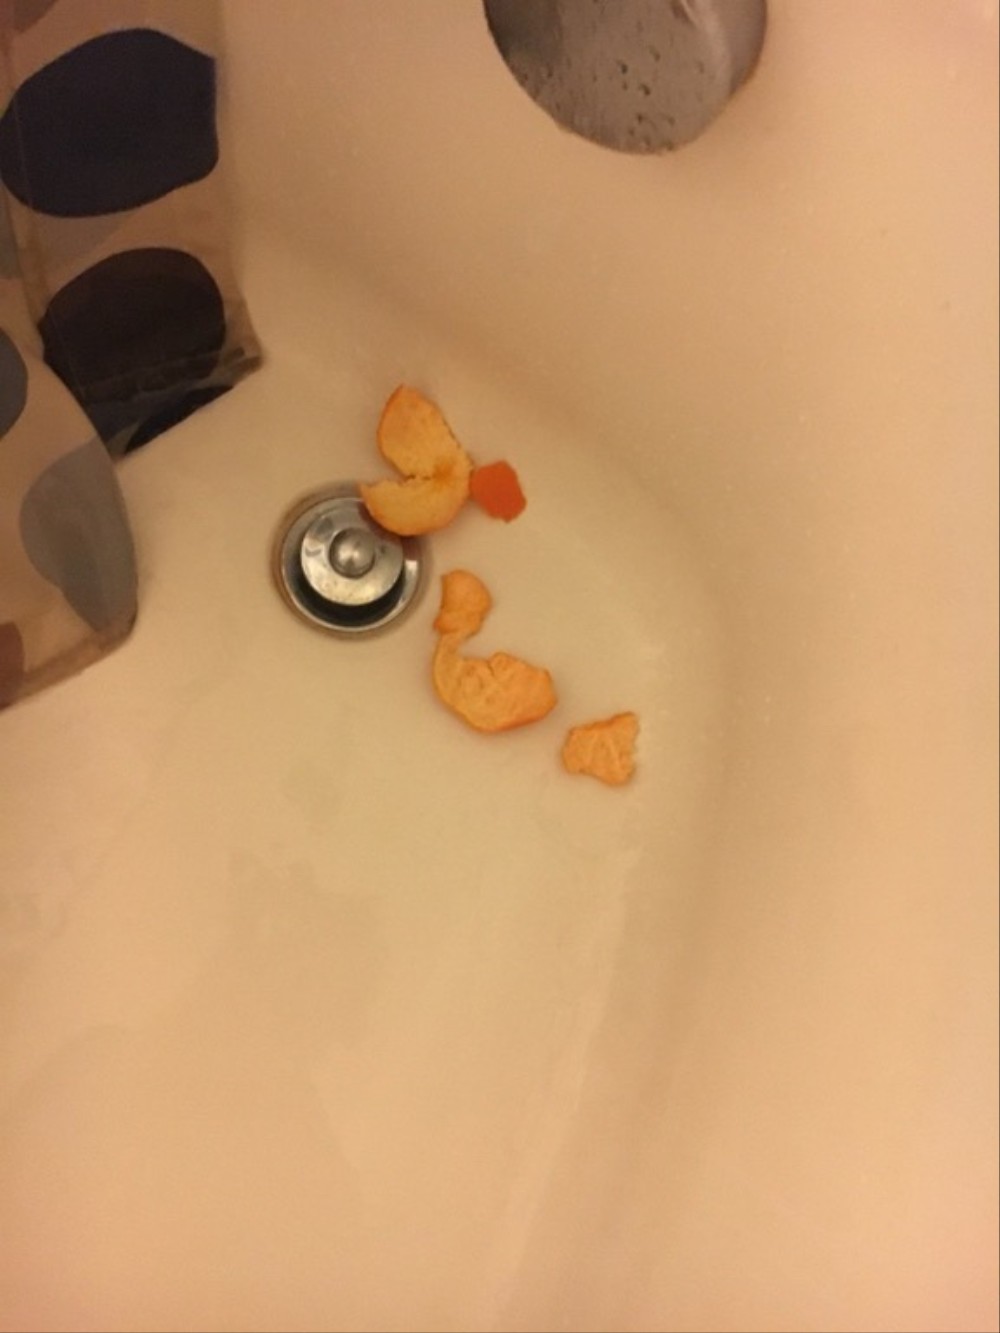 Eating Oranges In The Shower Is The Self Care You Didnt Know You Needed